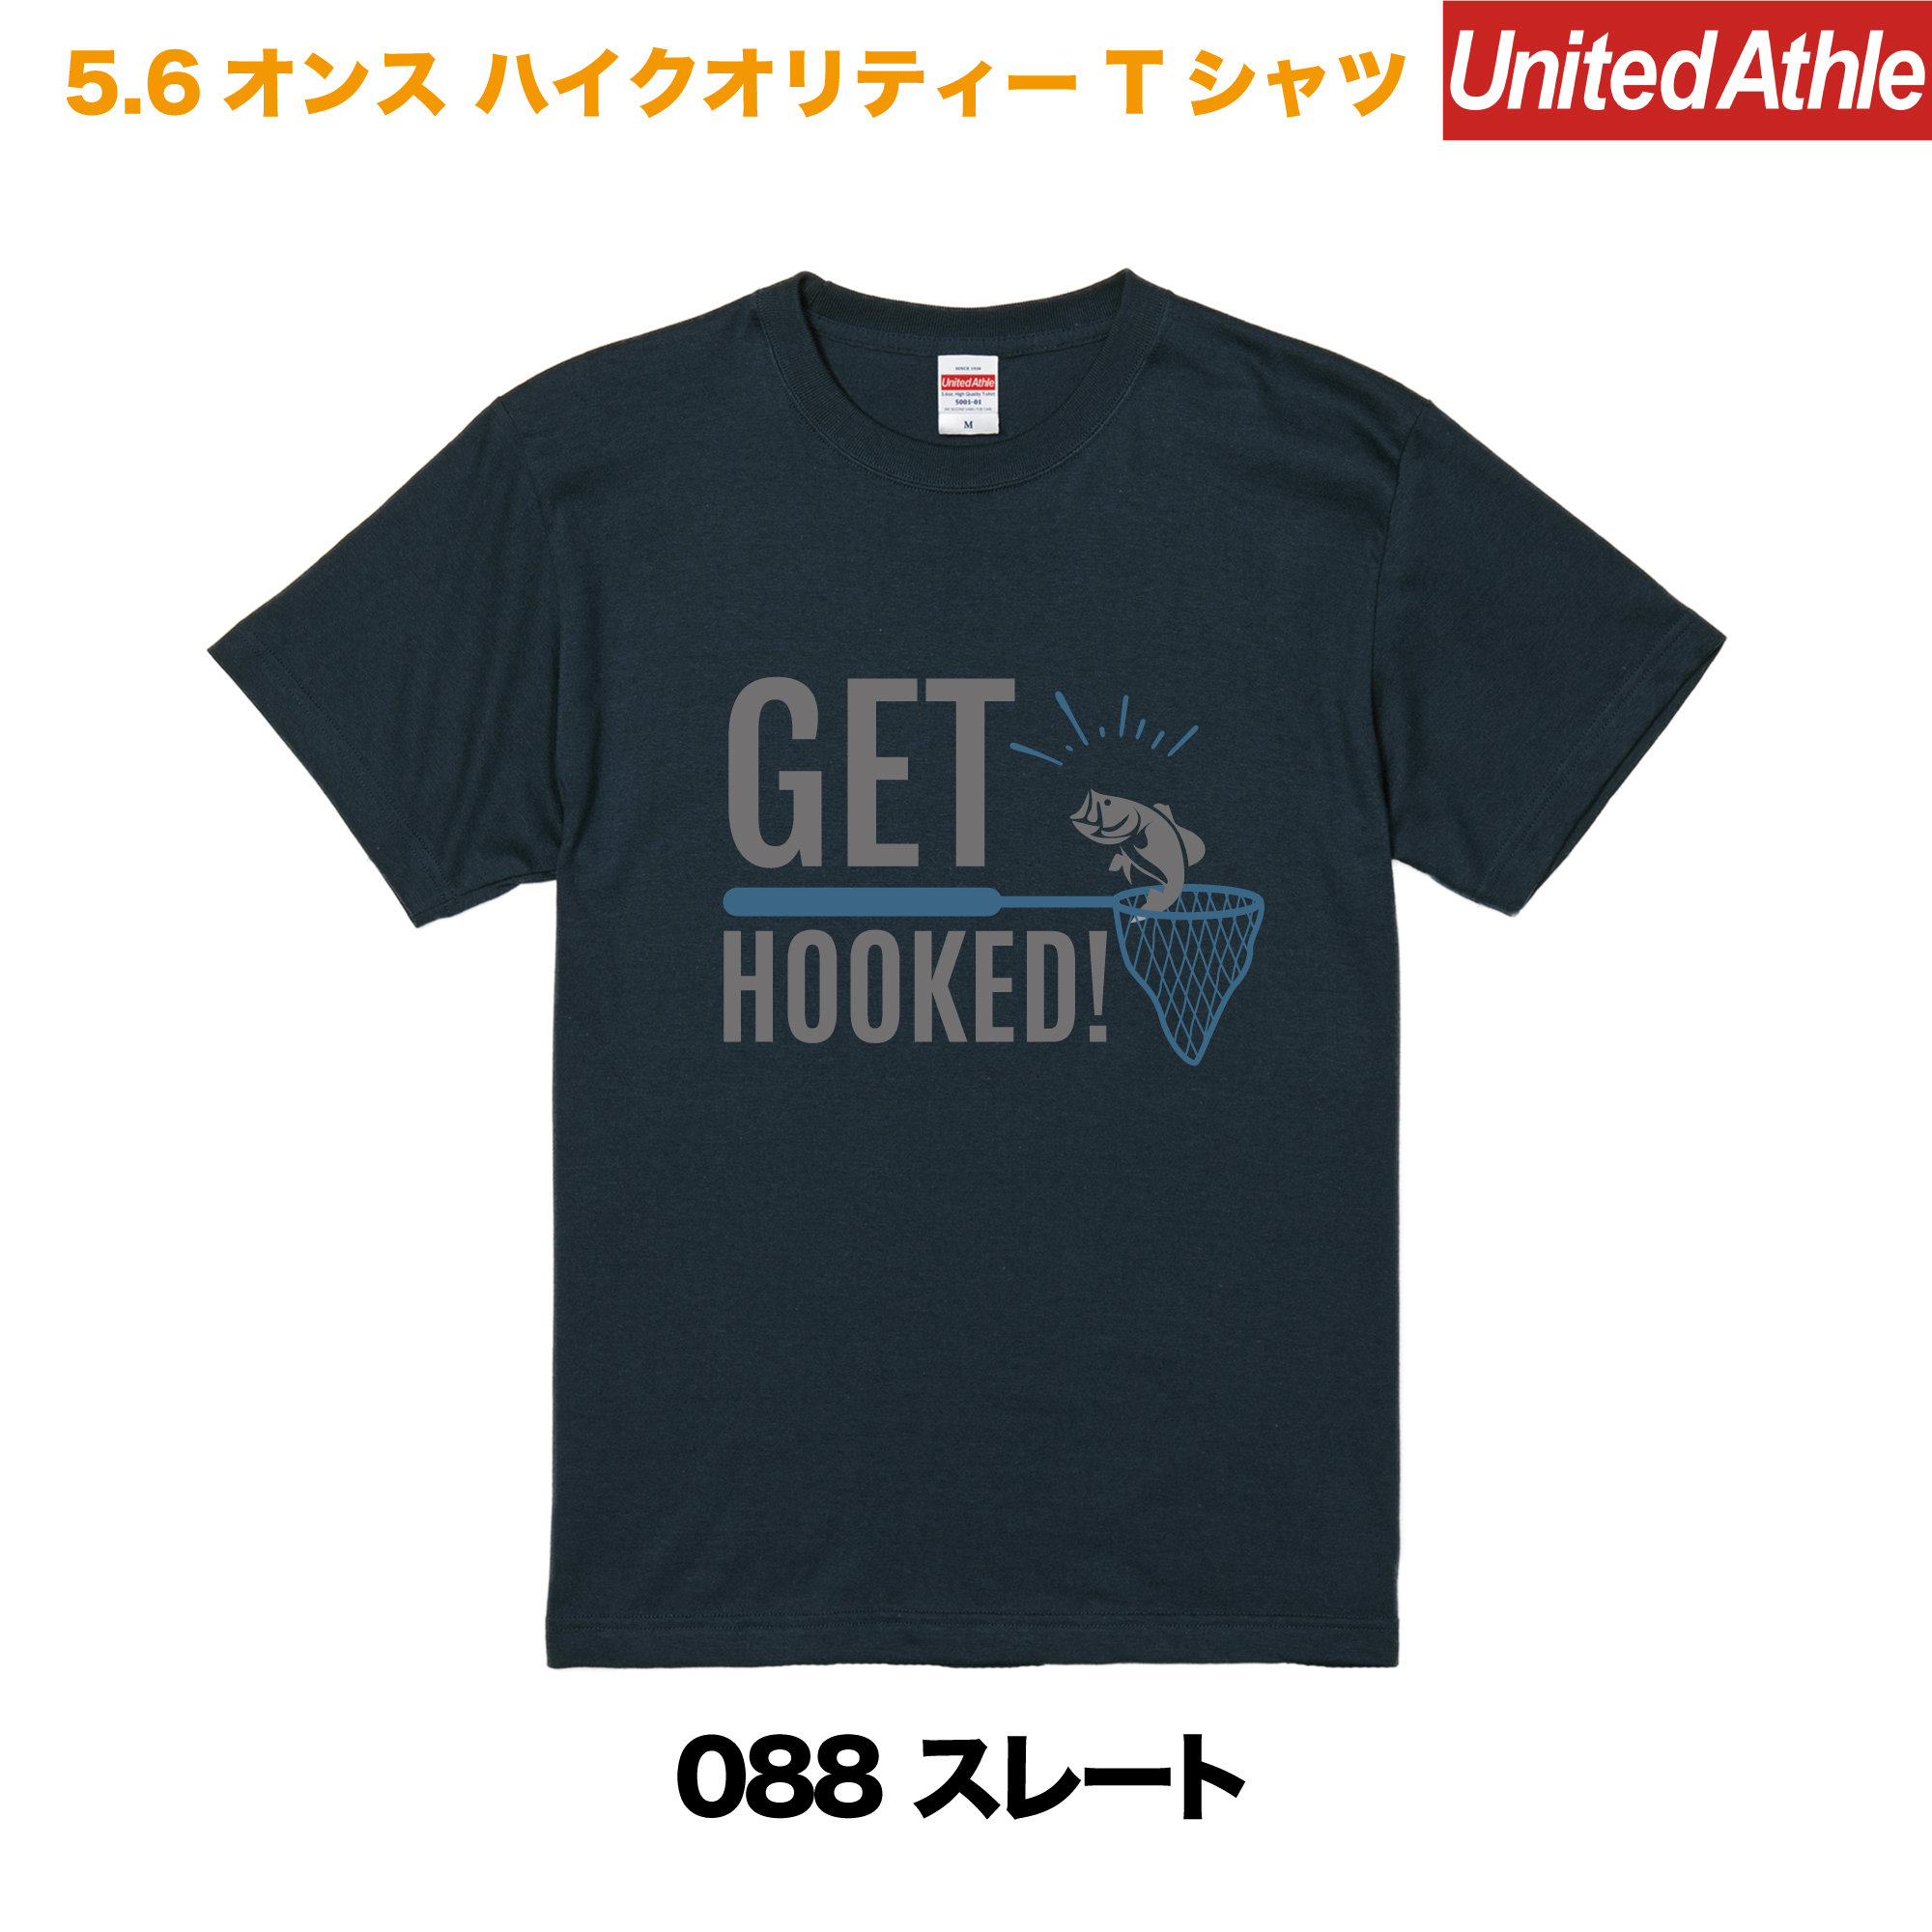 GET HOOKED　プリントTシャツ　5001-01【スレート】＜アダルト＞